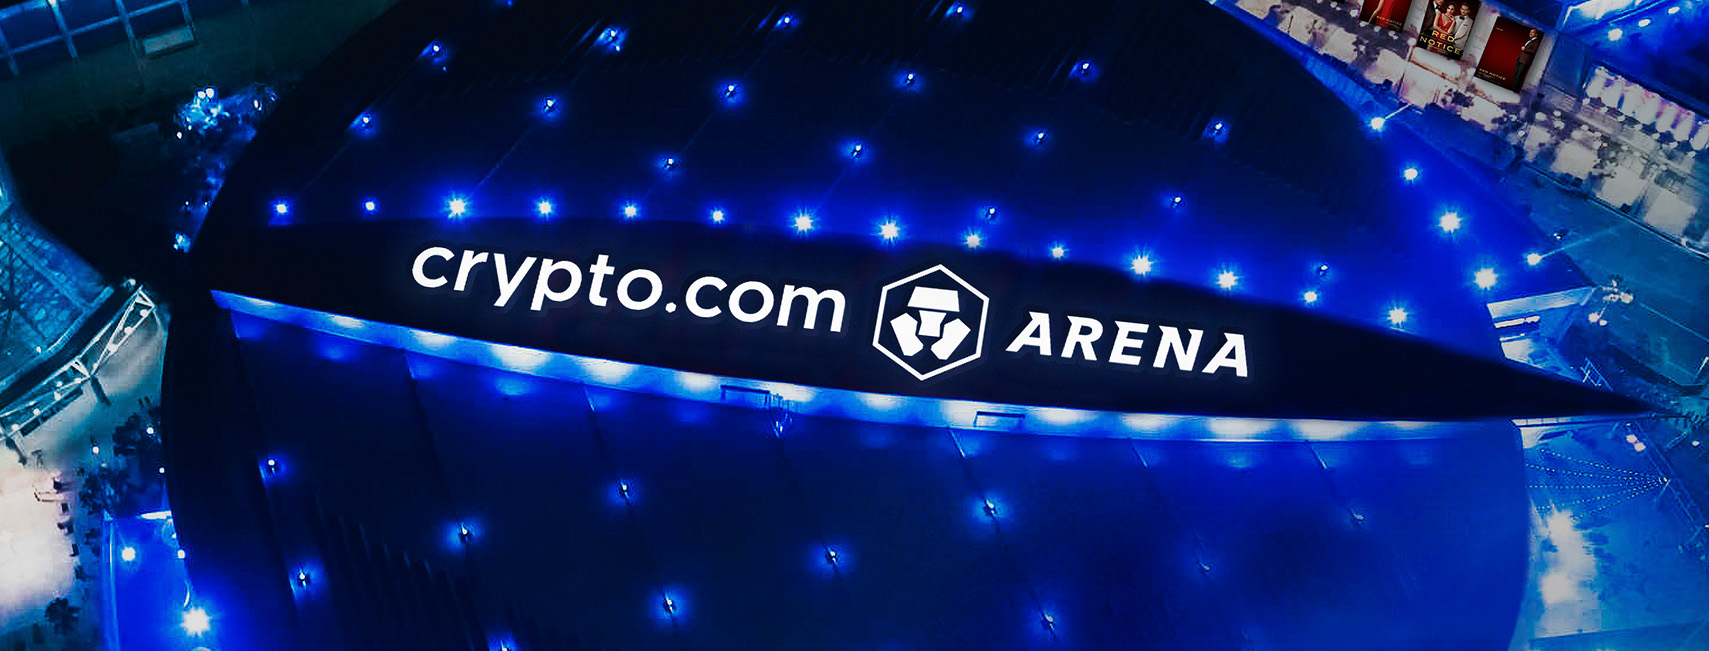 How Crypto Arena hosts three professional sports teams - Los Angeles Times